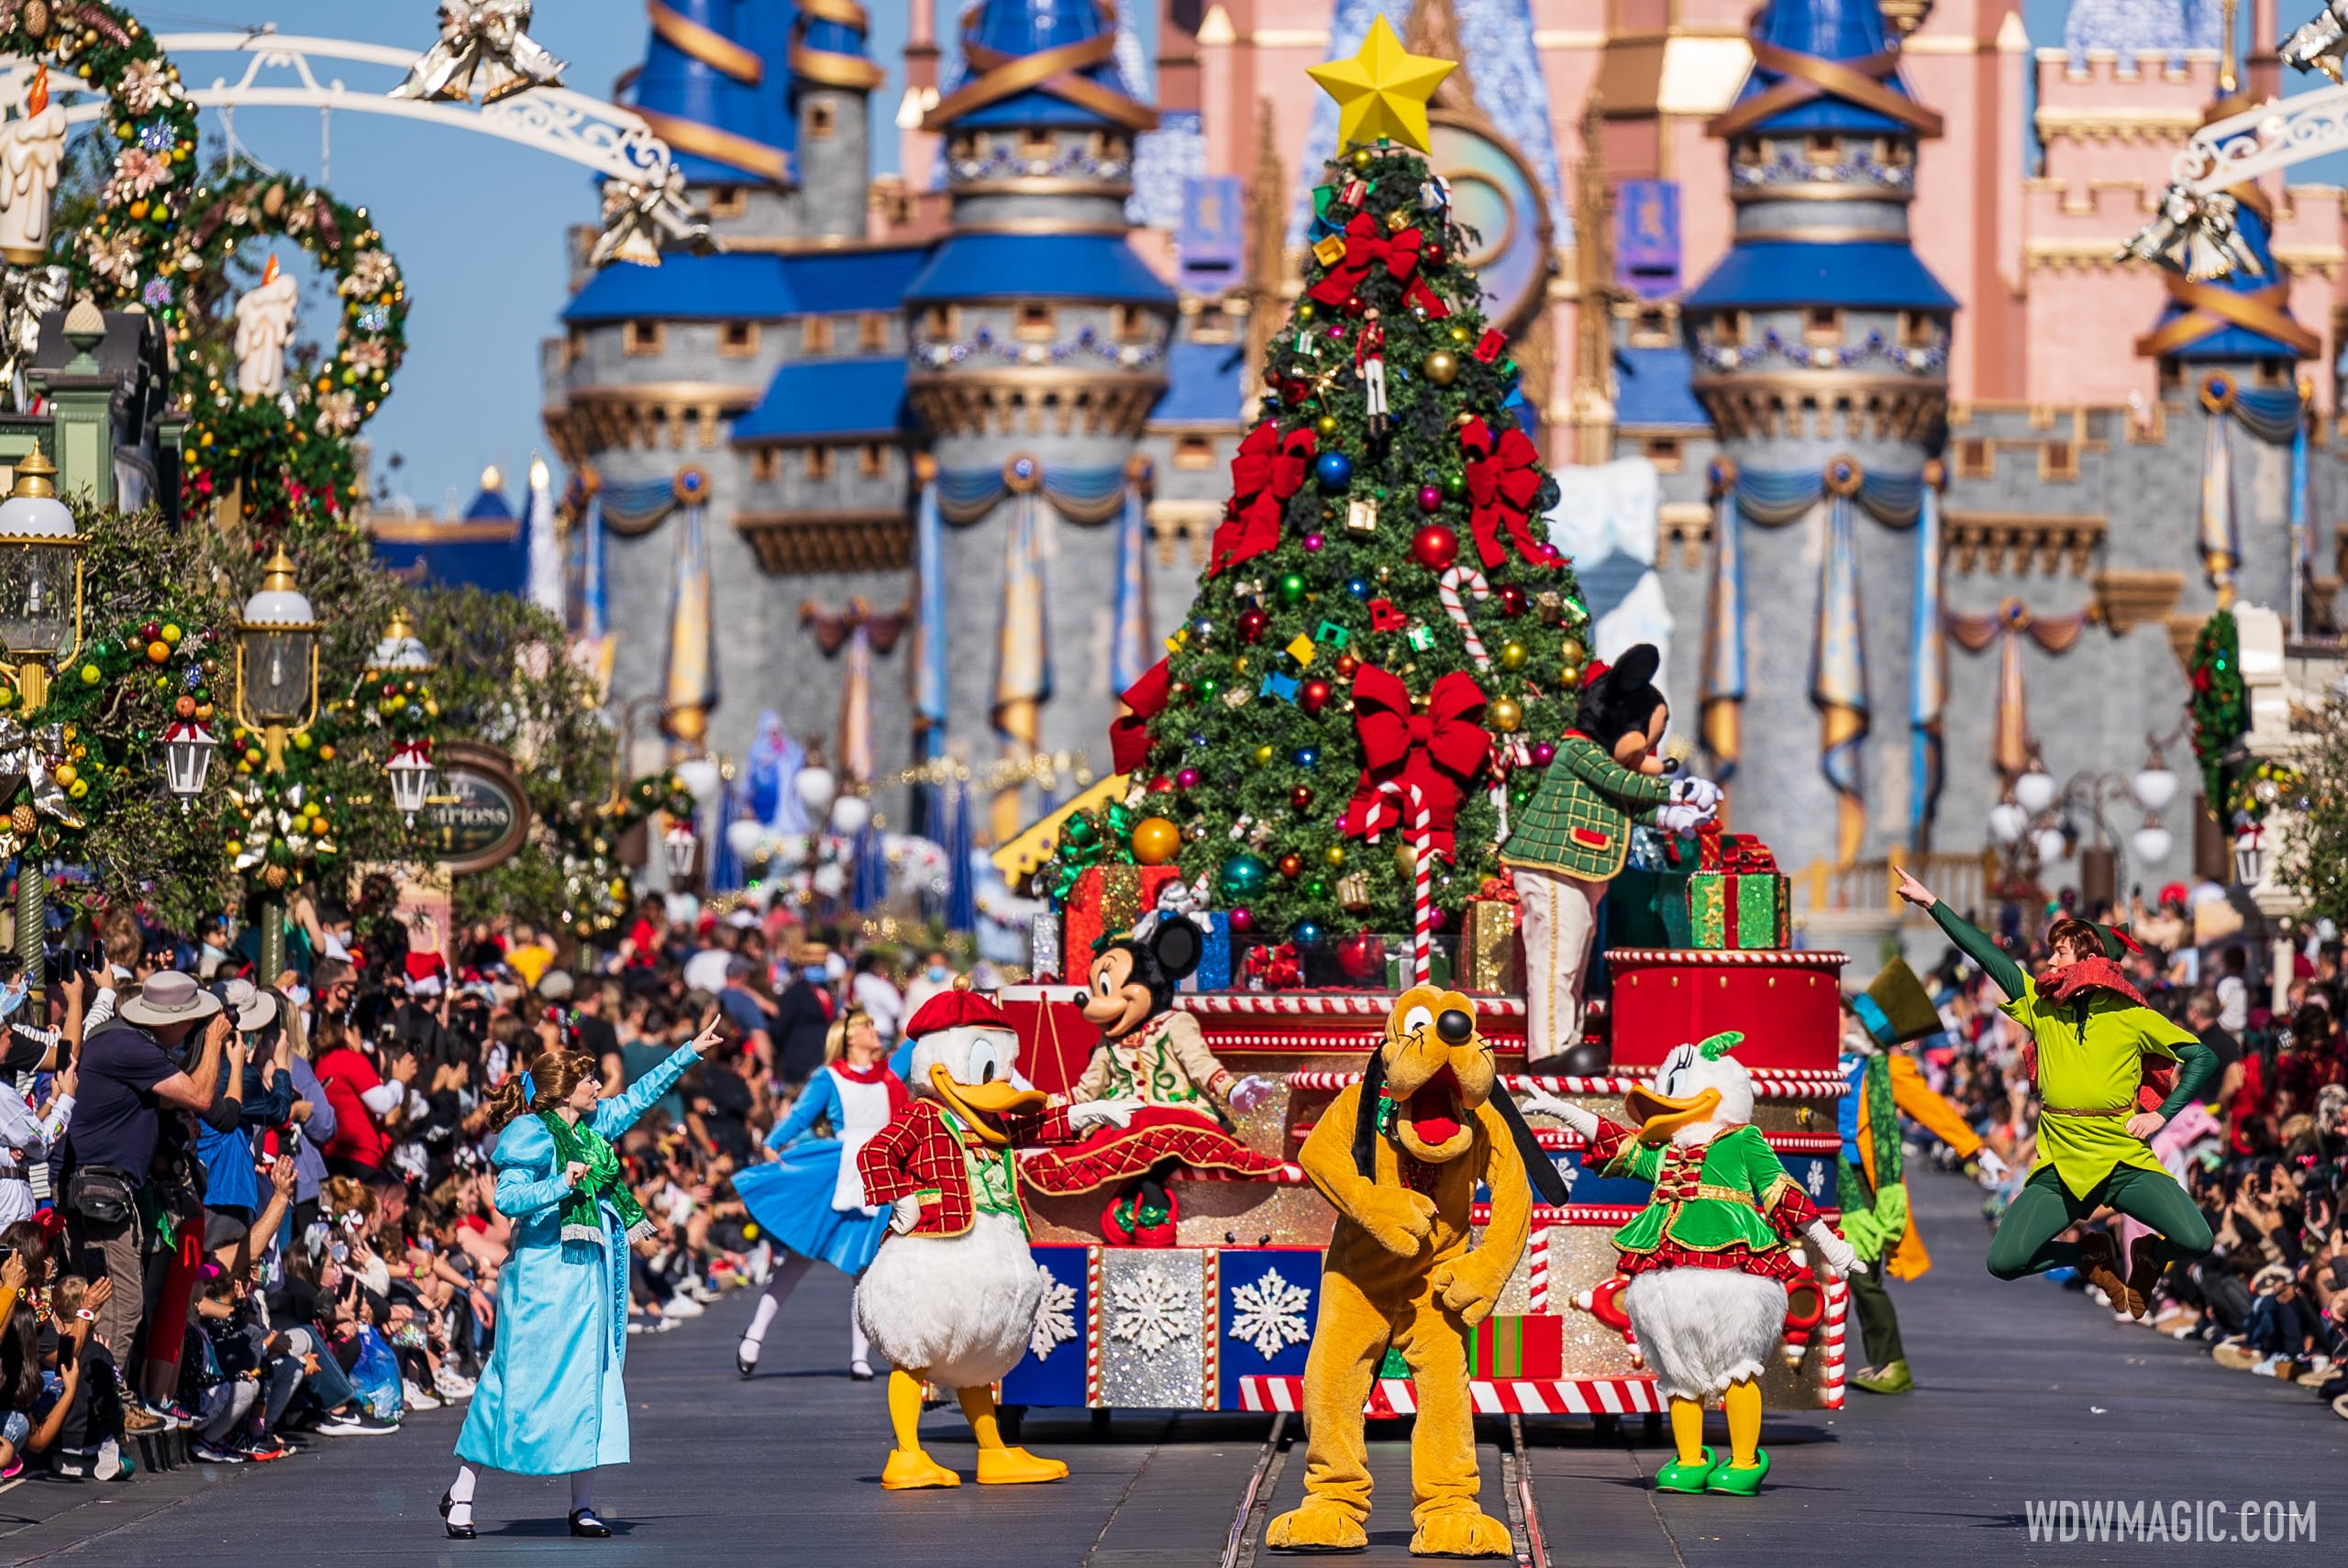 Disney World sees the return of daytime parades with 'Mickey's Once